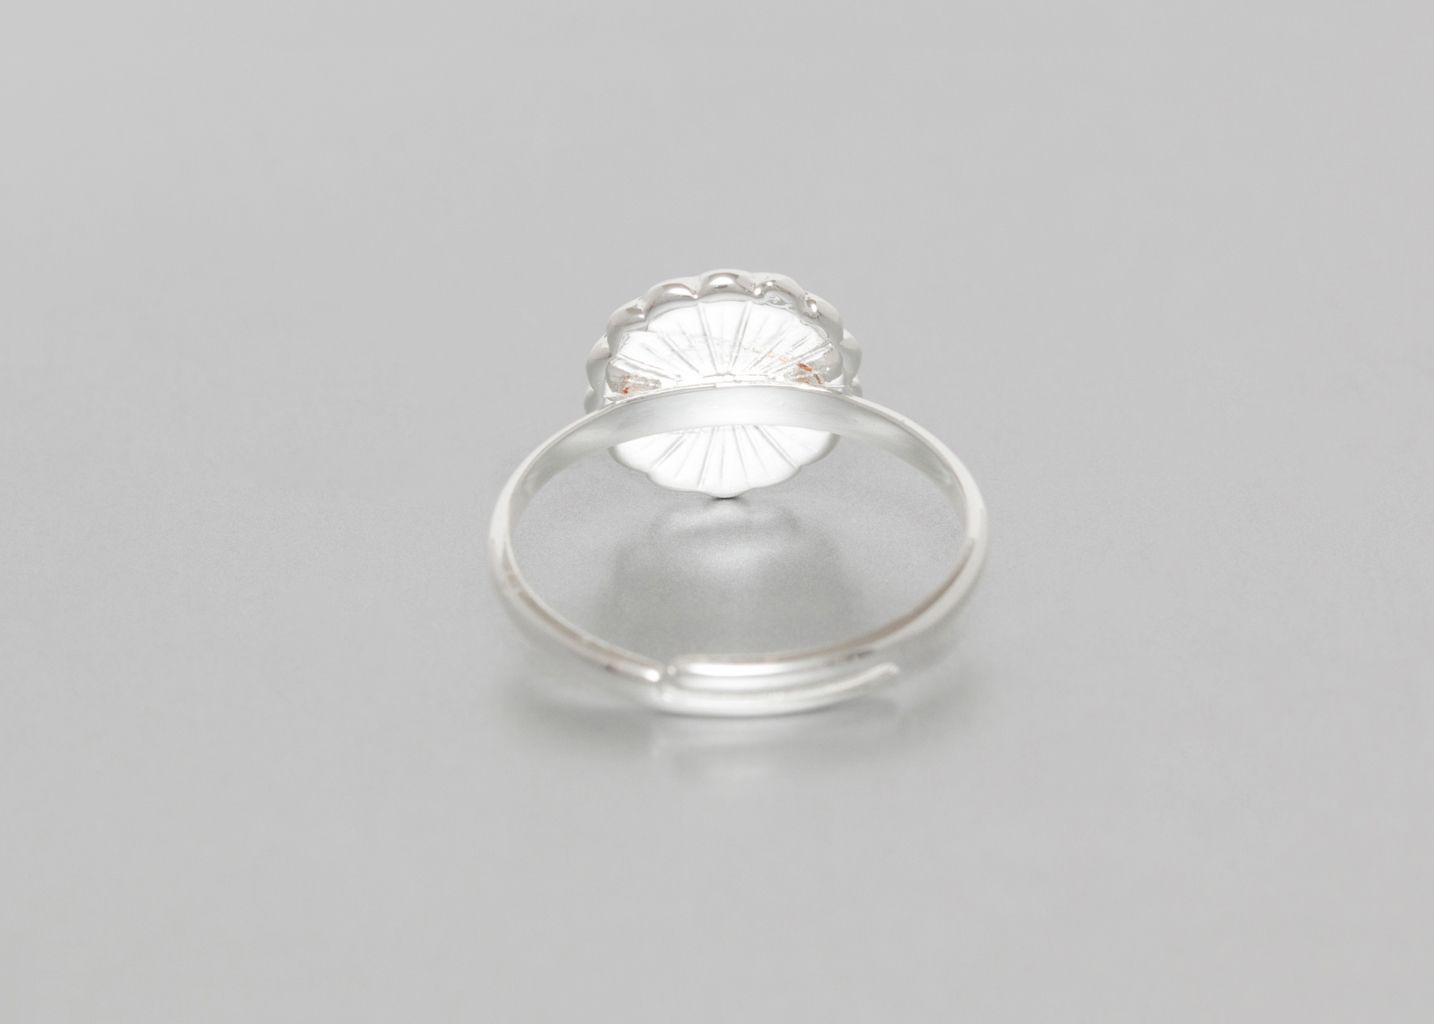 Marguerite Ring - Grizzly Chéri